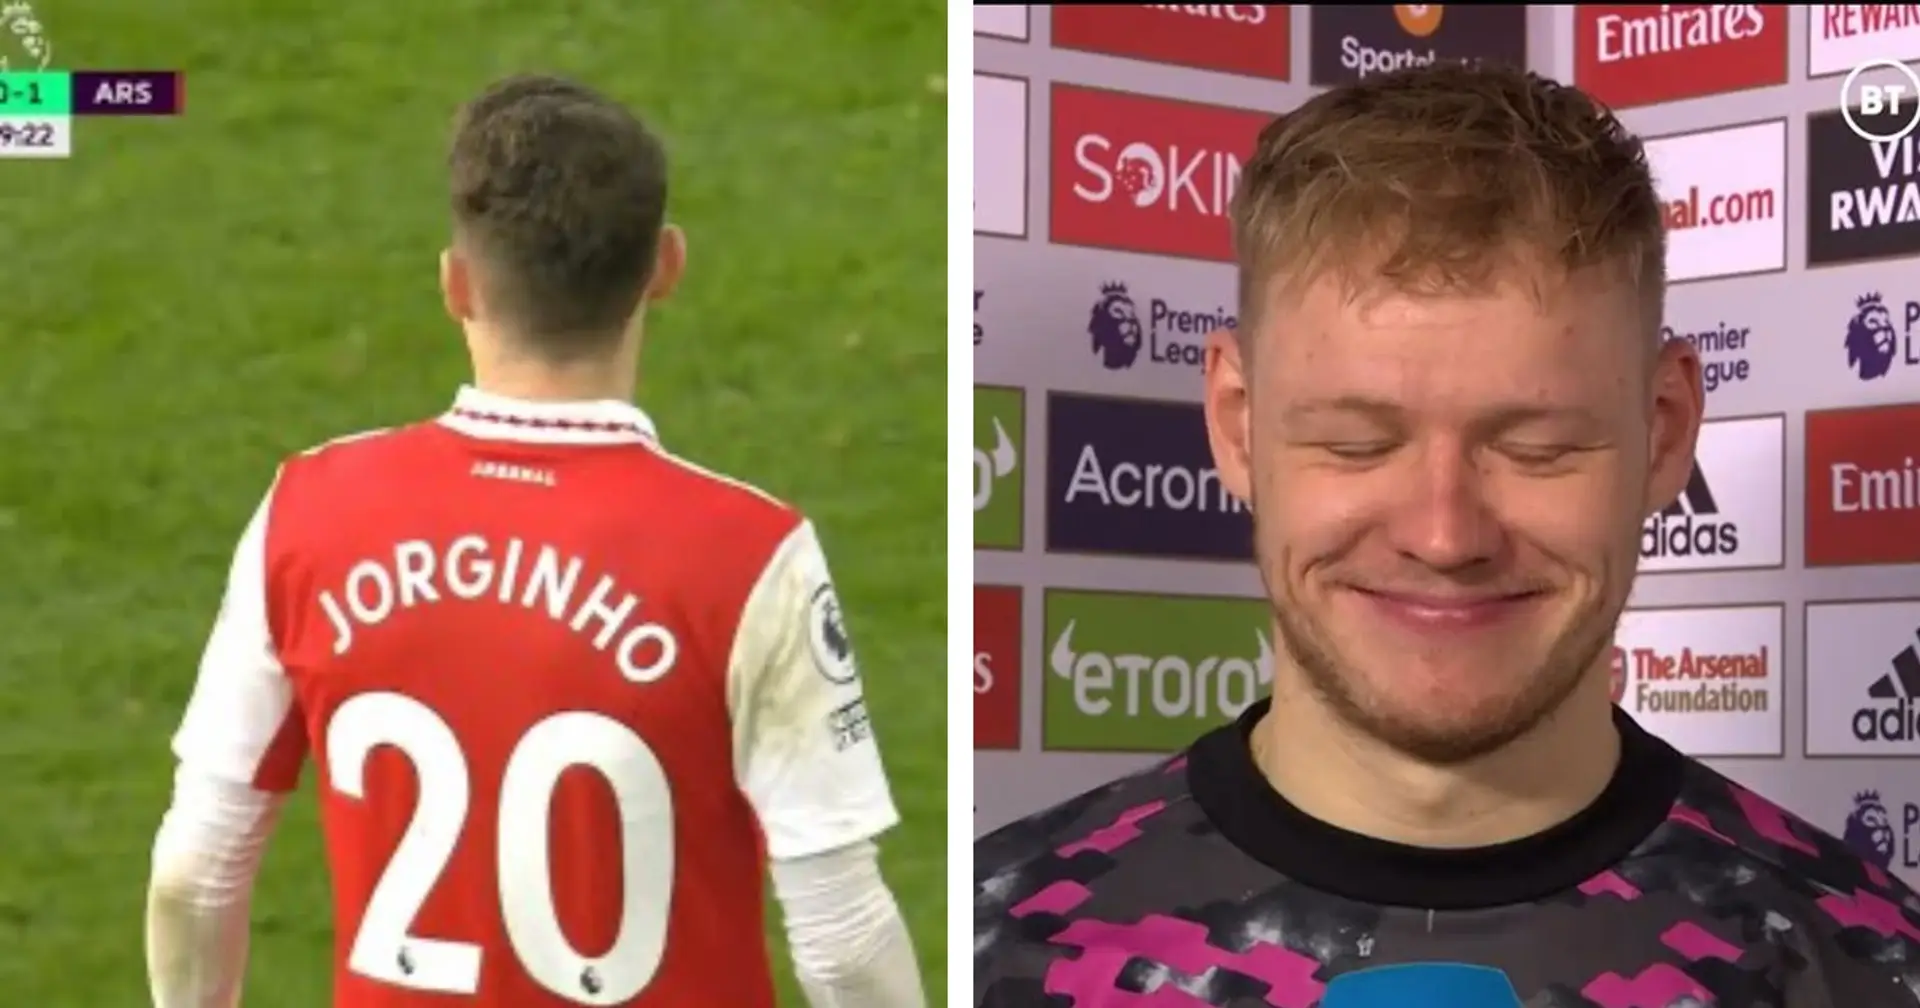 Ramsdale names three Arsenal players with winning mentality - one is Jorginho